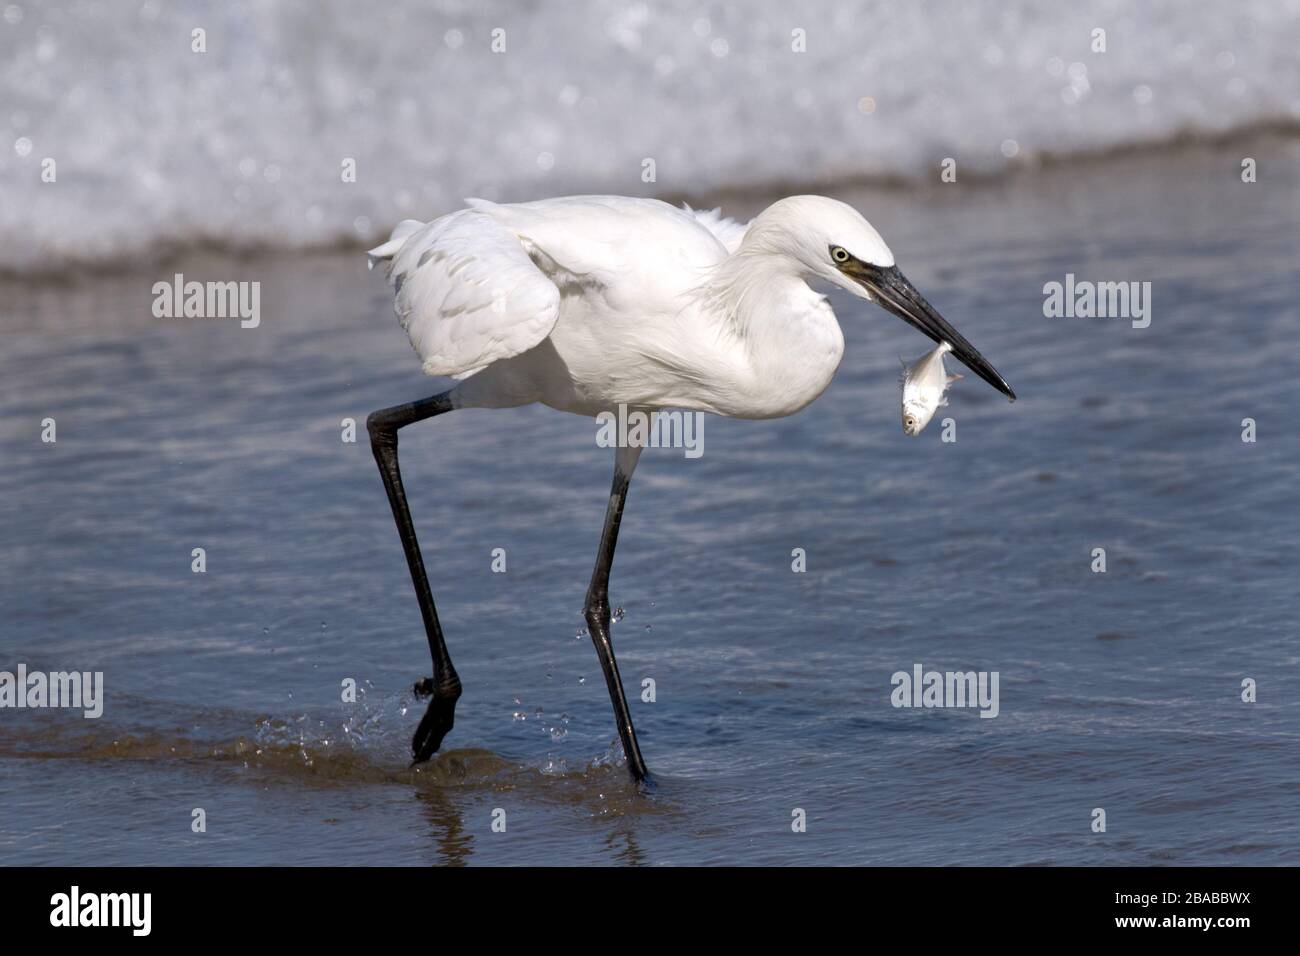 An Egret capturing a fish while wading along the shoreline in Costa Rica. Stock Photo